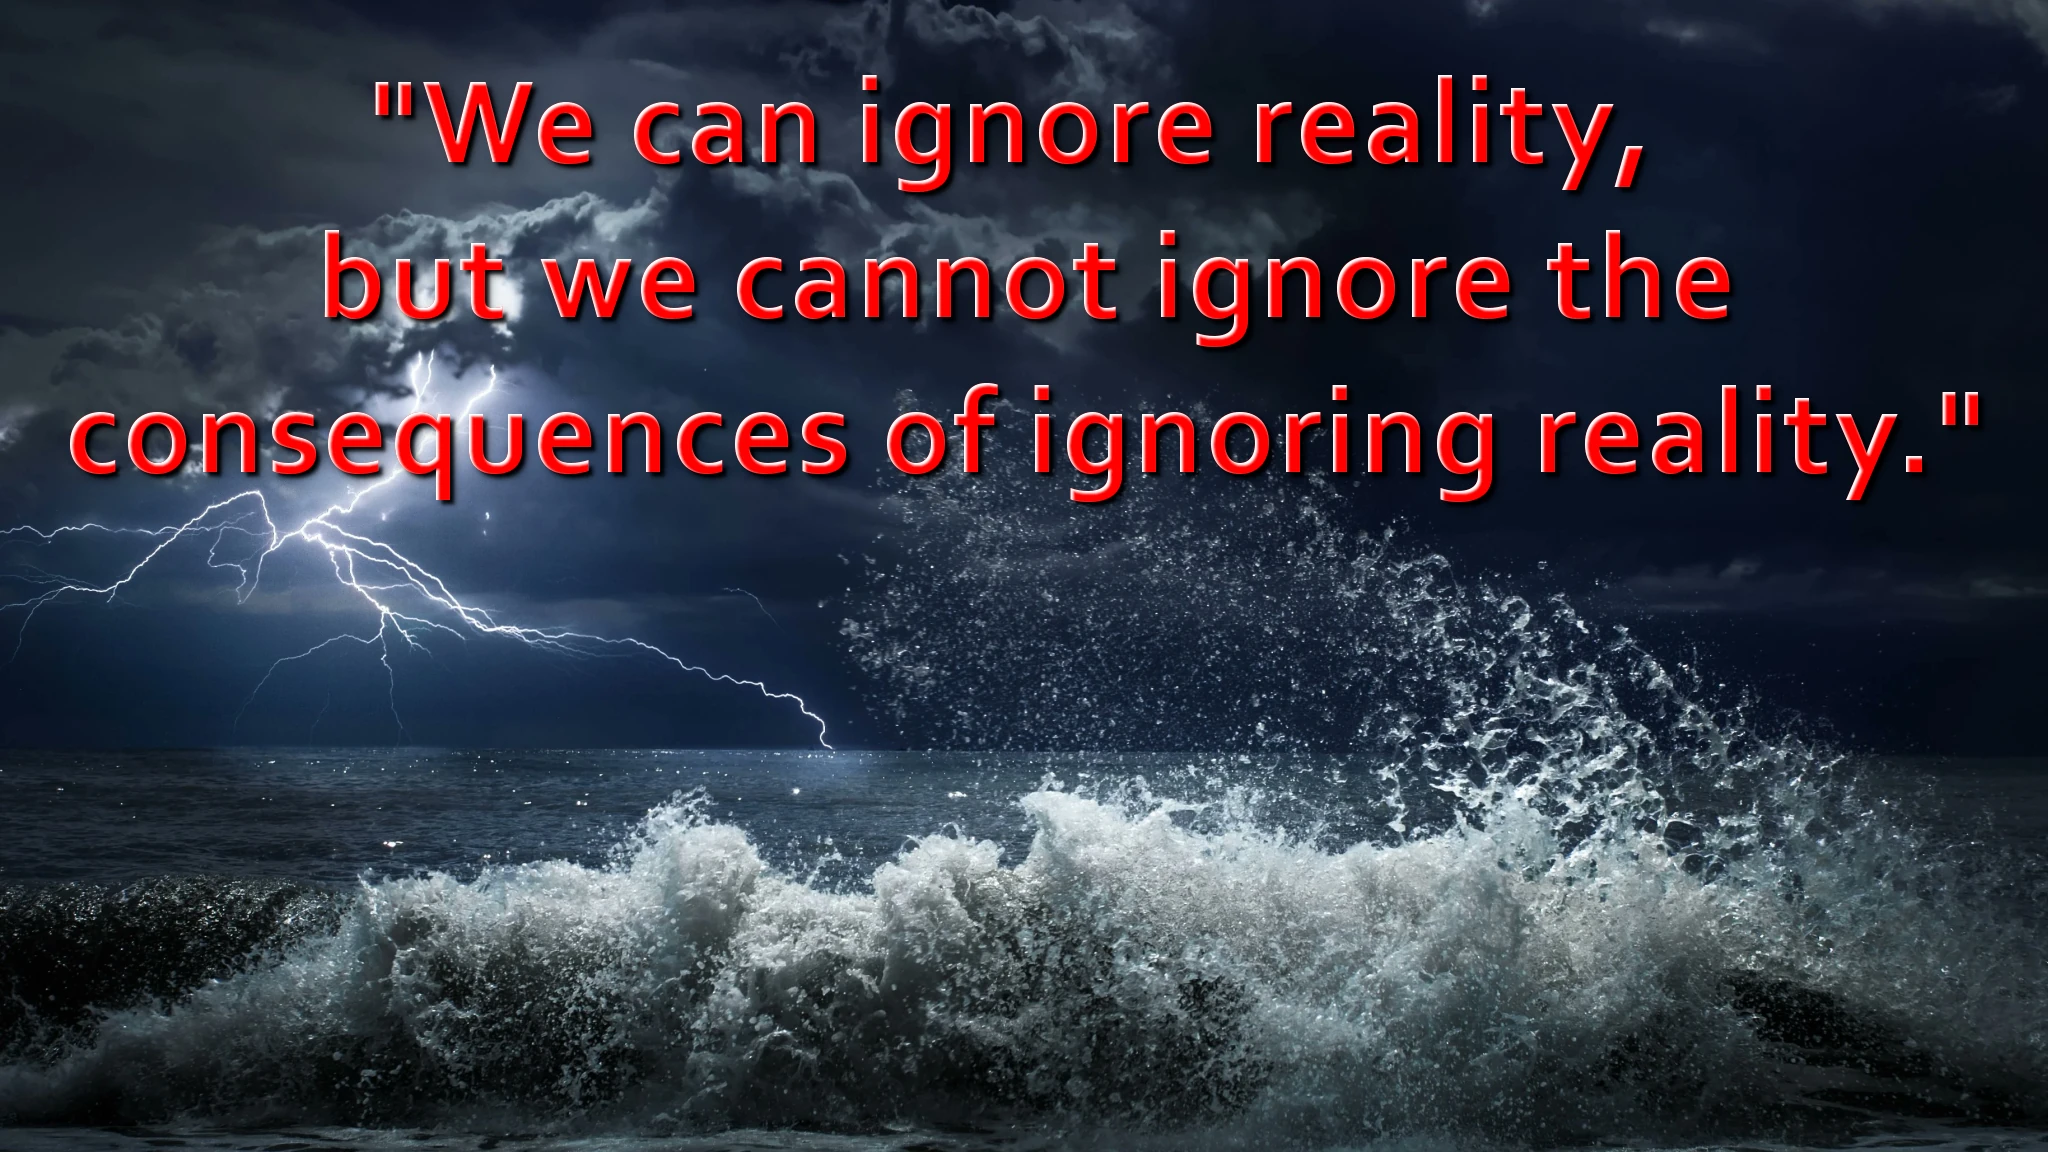 We can ignore